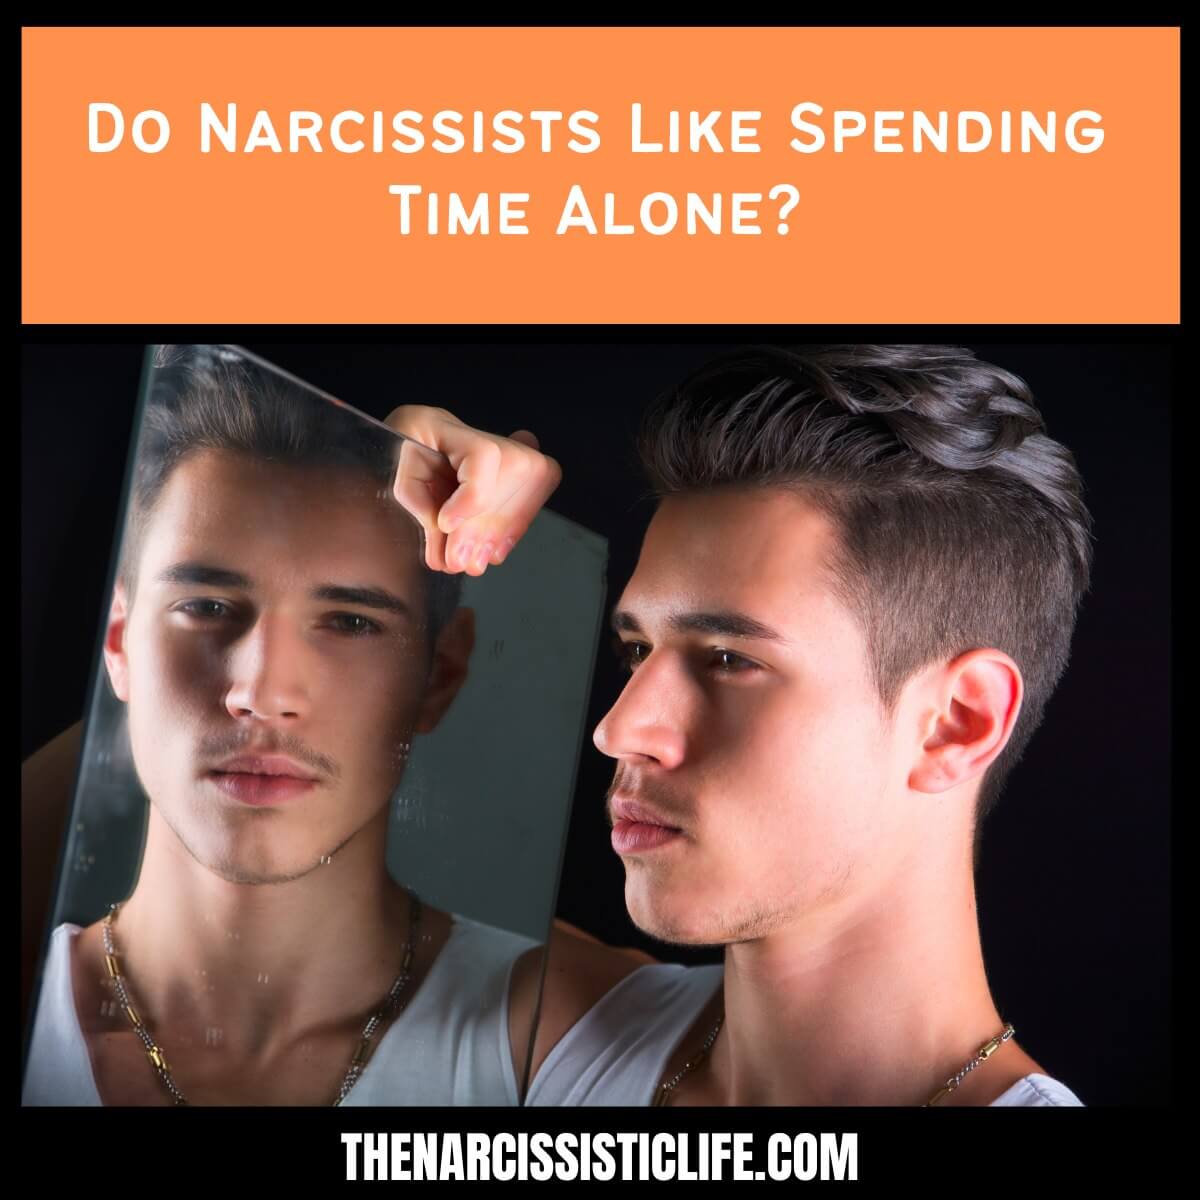 Do Narcissists Like Spending Time Alone